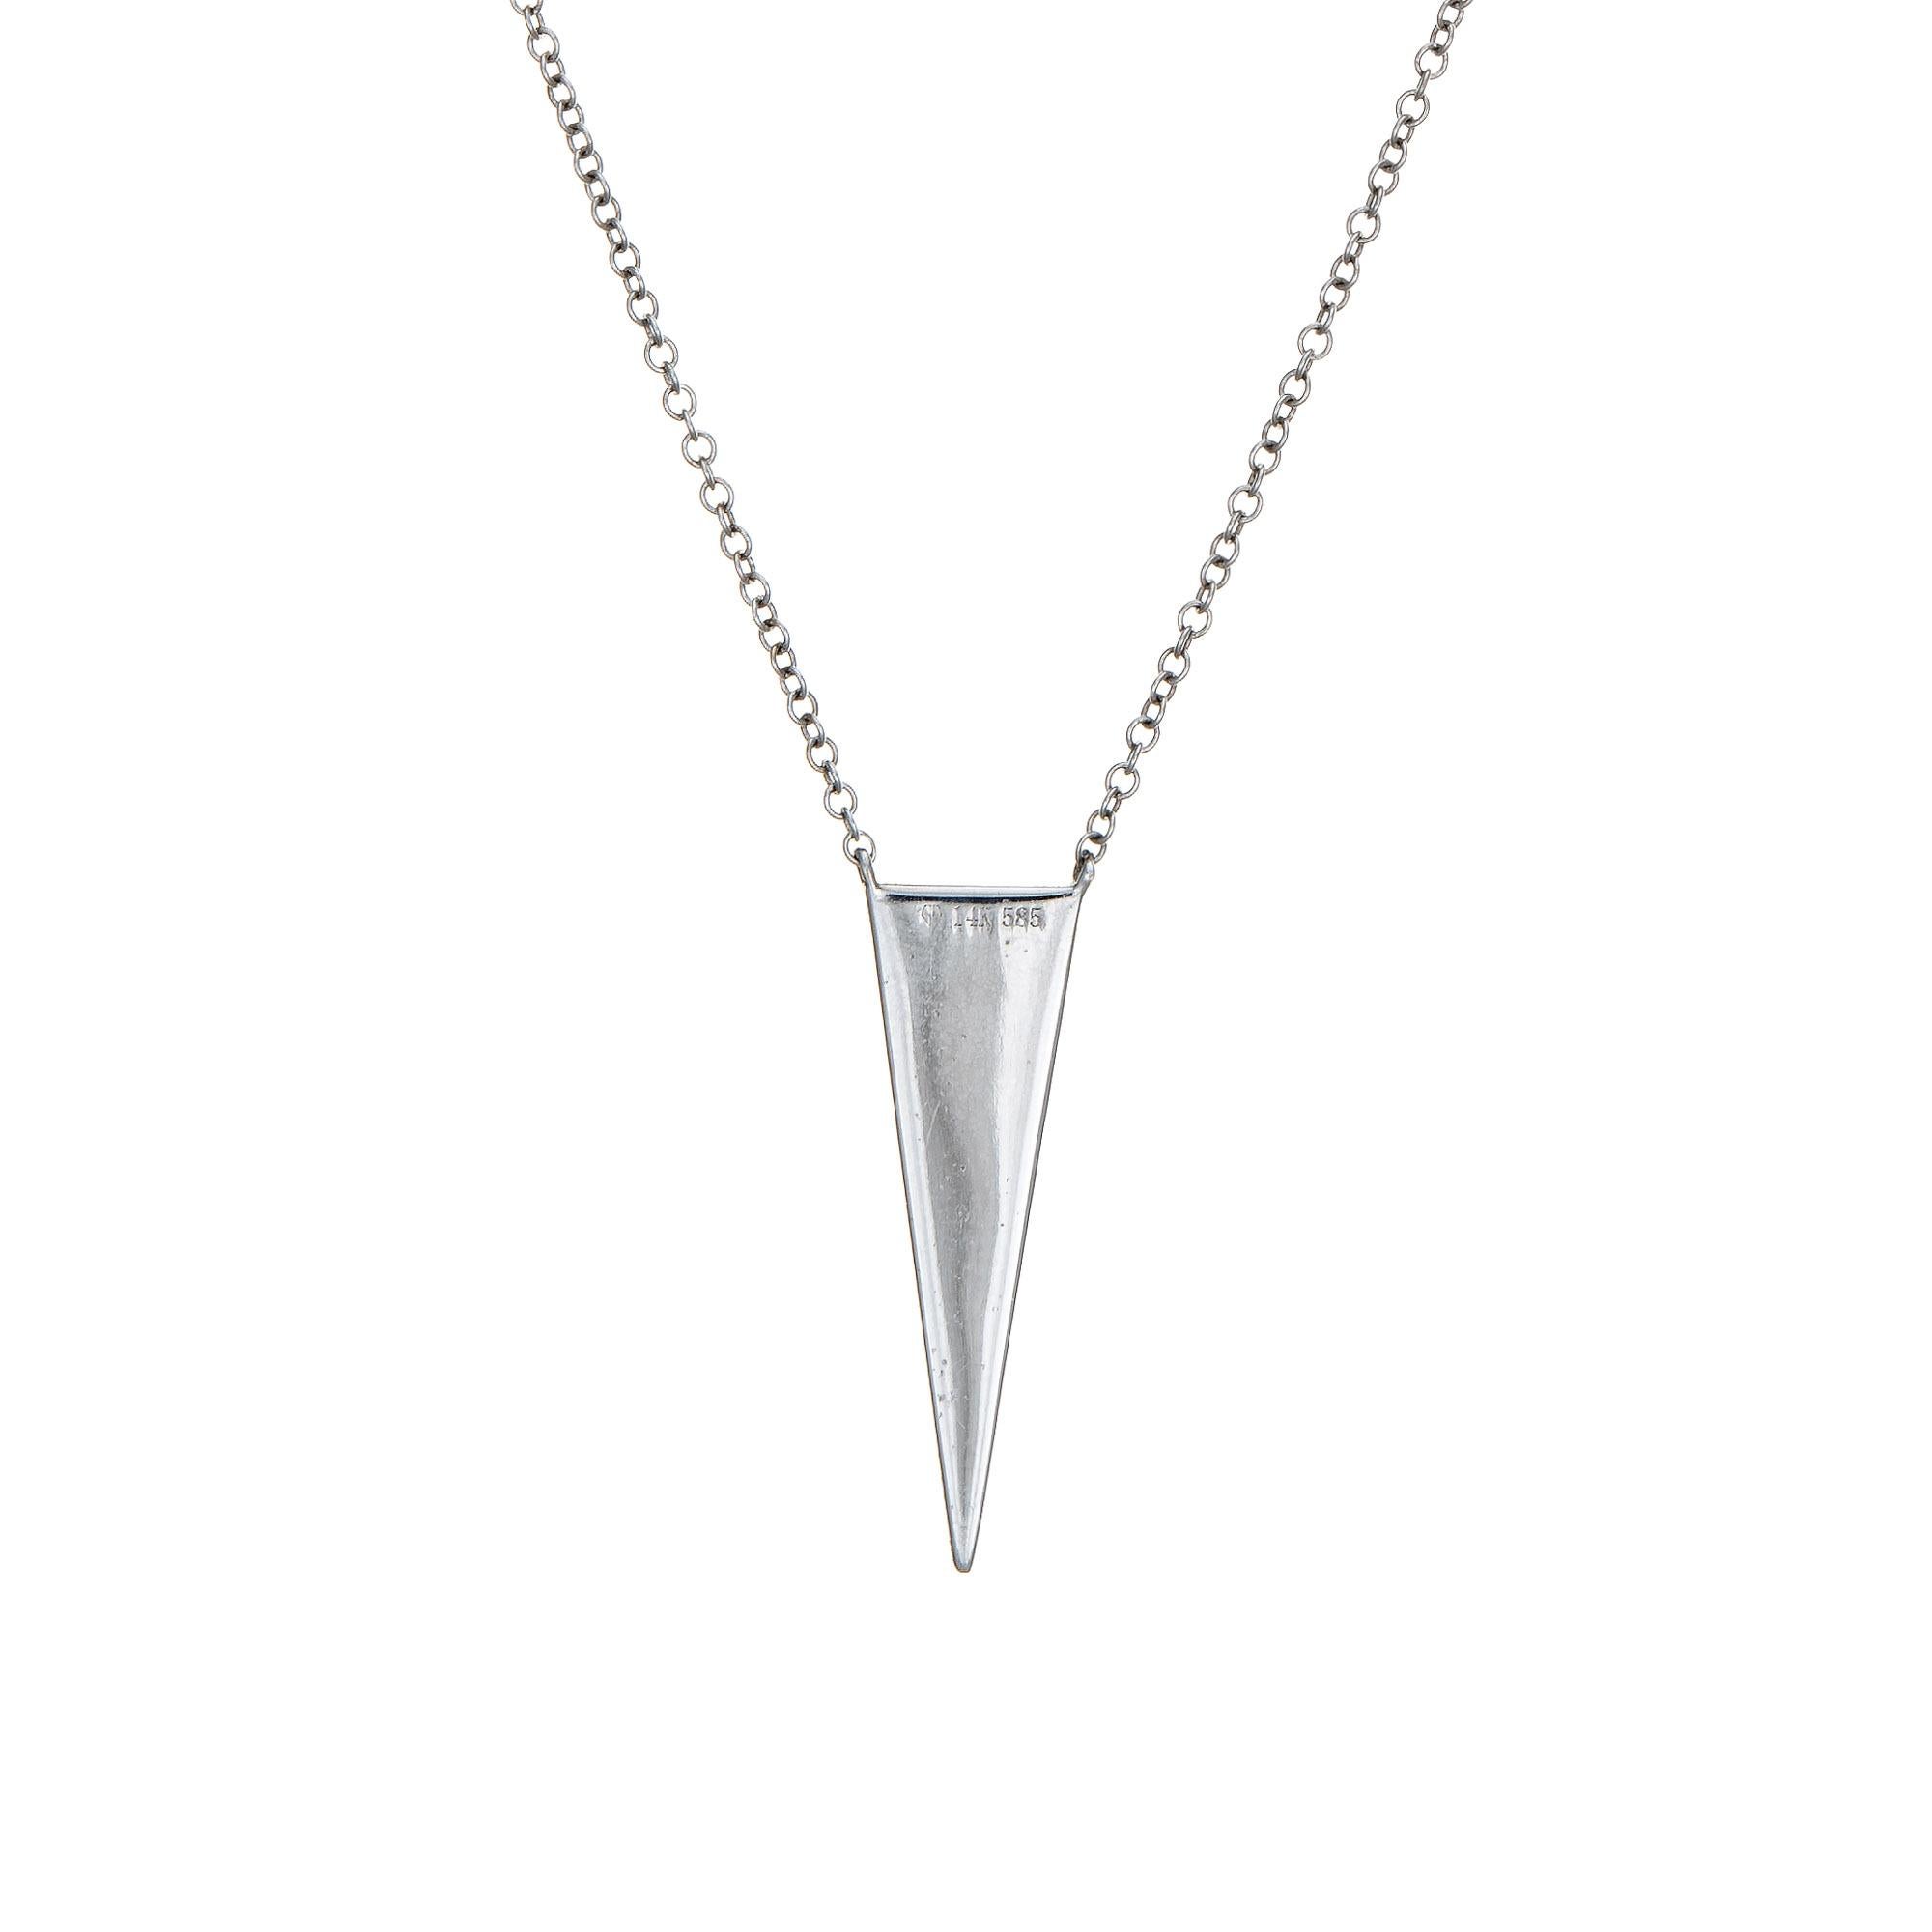 Stylish and finely detailed diamond spike necklace crafted in 14 karat white gold (circa 1960s). 

66 diamonds total an estimated 0.22 carts (estimated at I-J color and SI1-I2 clarity).   

The simple and elegant design highlights micro pave